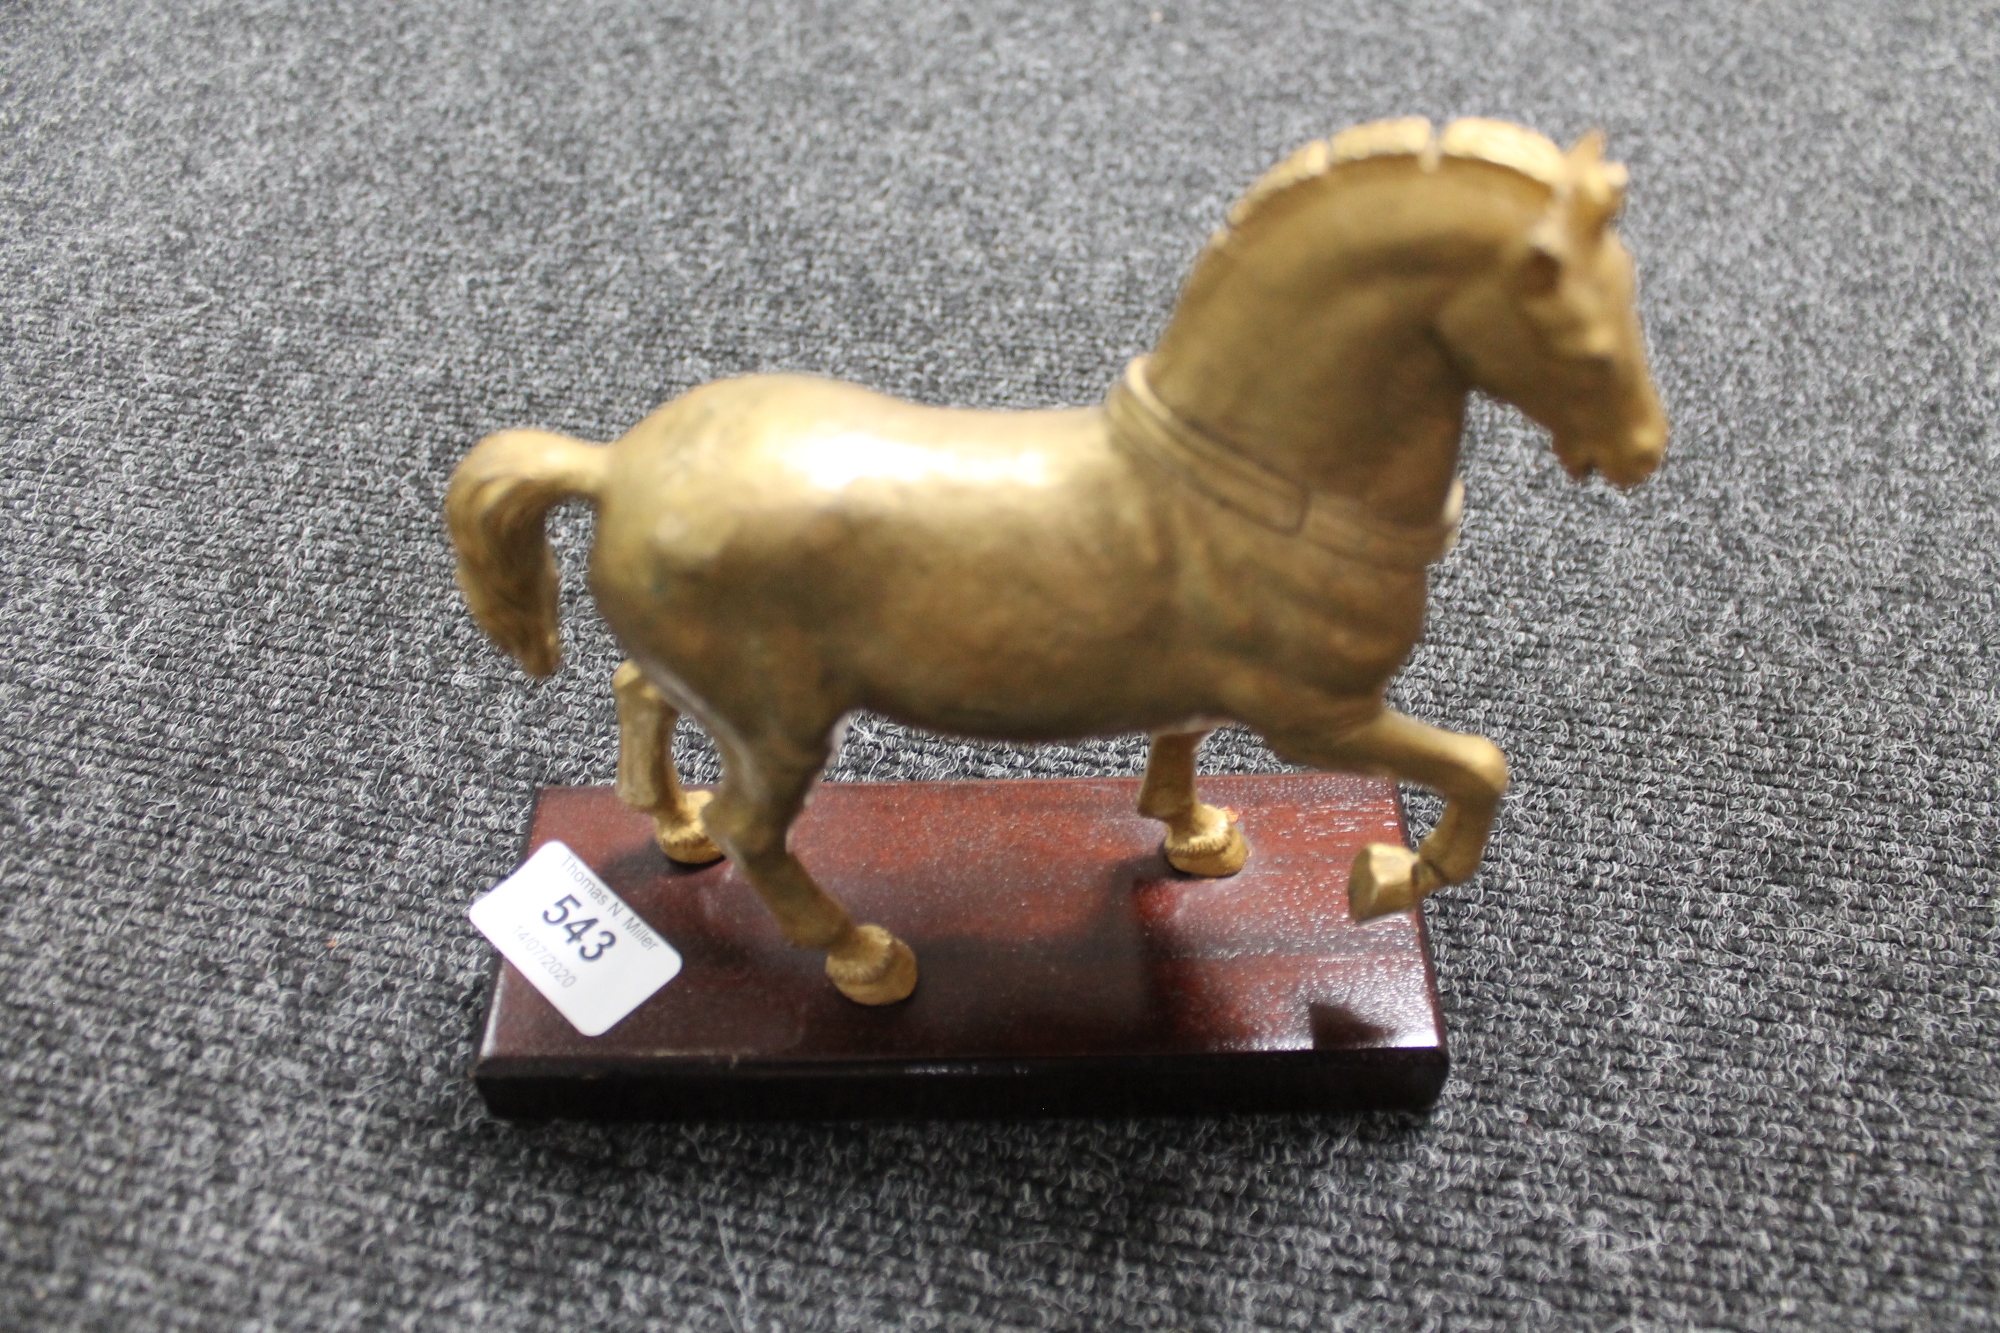 A copper gilded horse figure - The San Marco horse IV